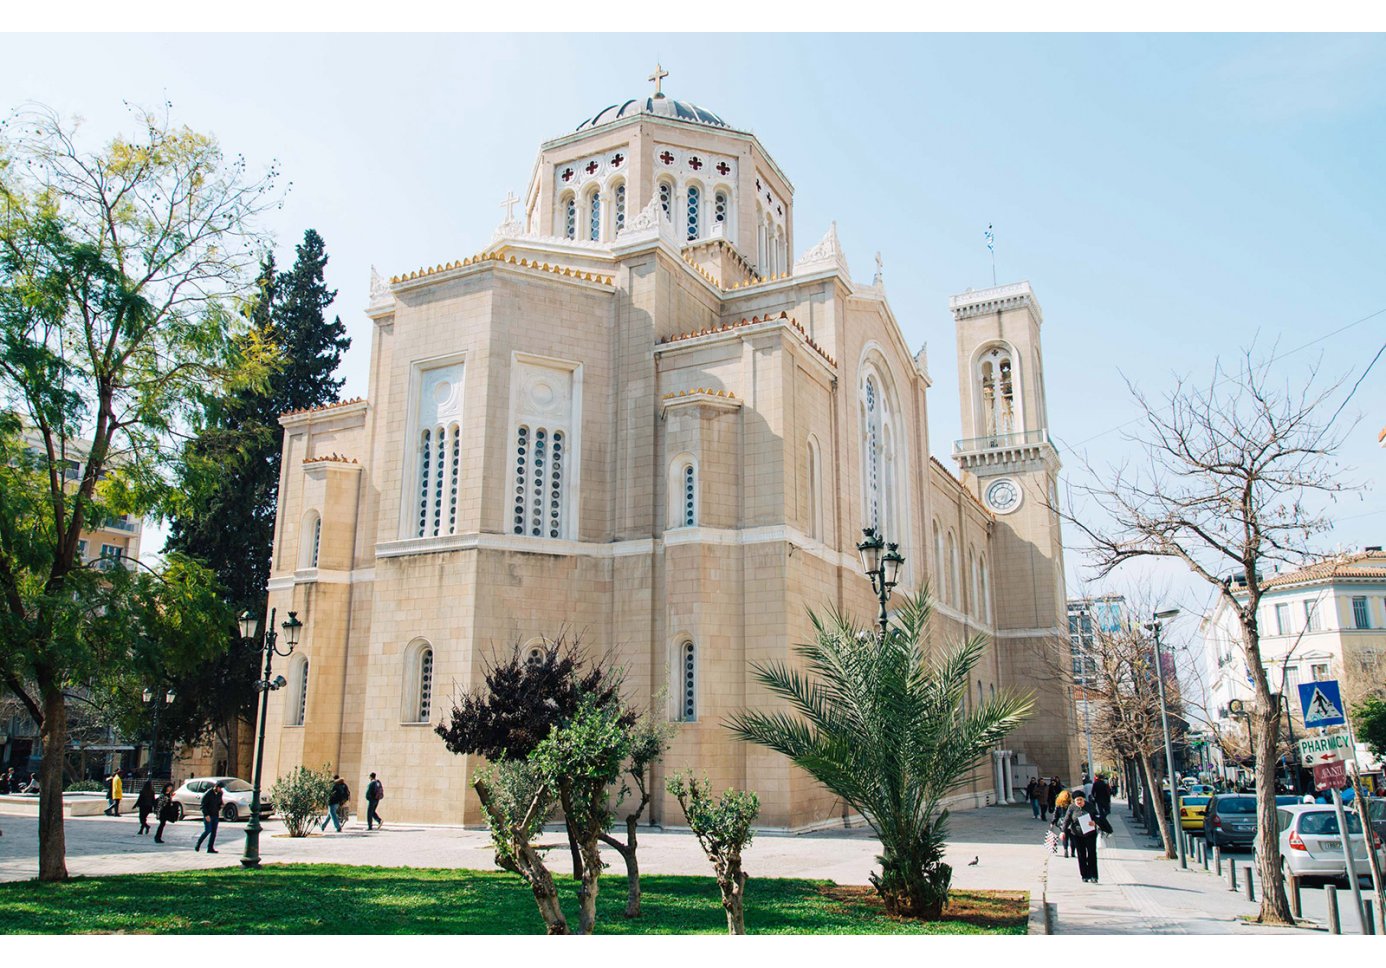 The Metropolitan Cathedral of Athens